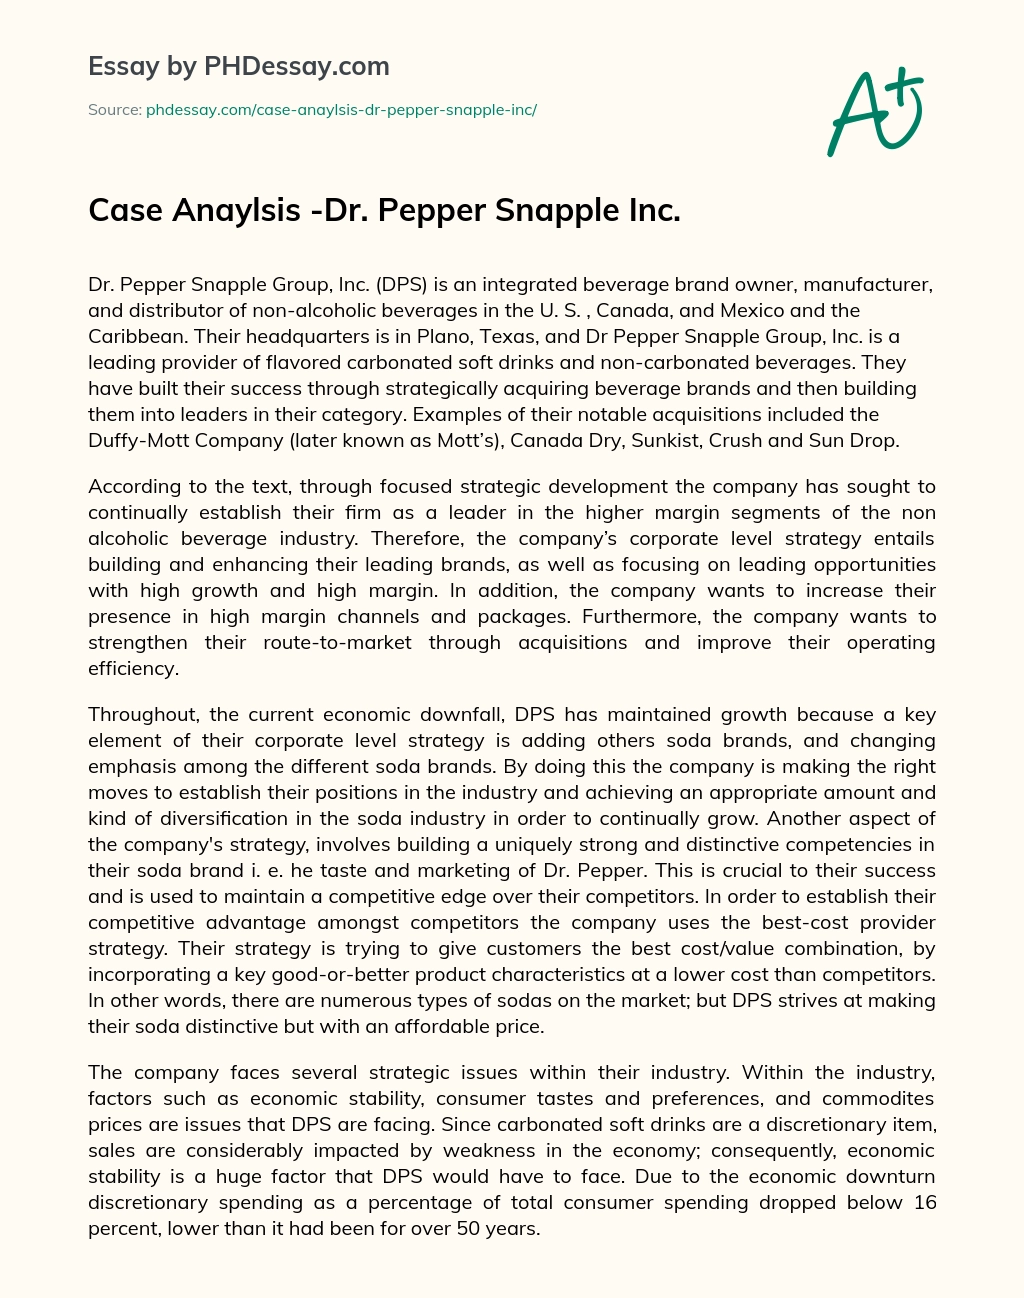 Case Anaylsis -Dr. Pepper Snapple Inc. essay